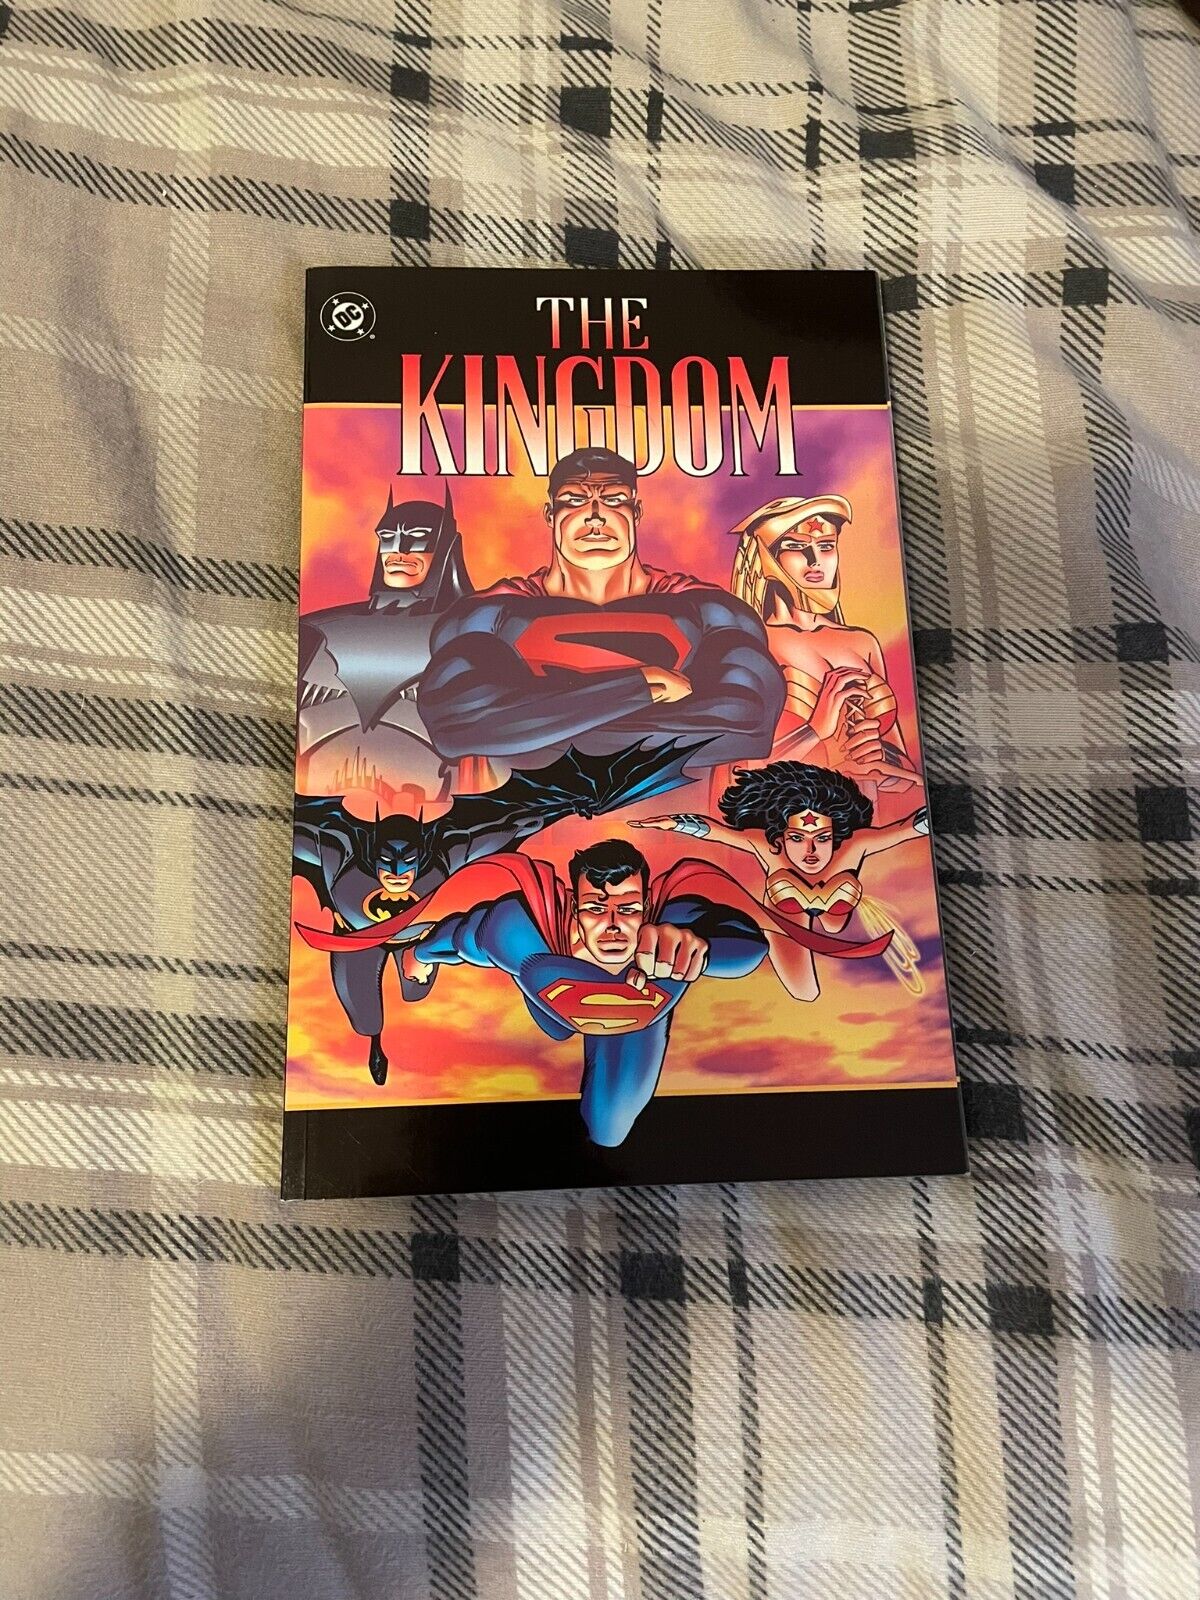 The Kingdom by Mark Waid graphic novel trade paperback - autographed by author